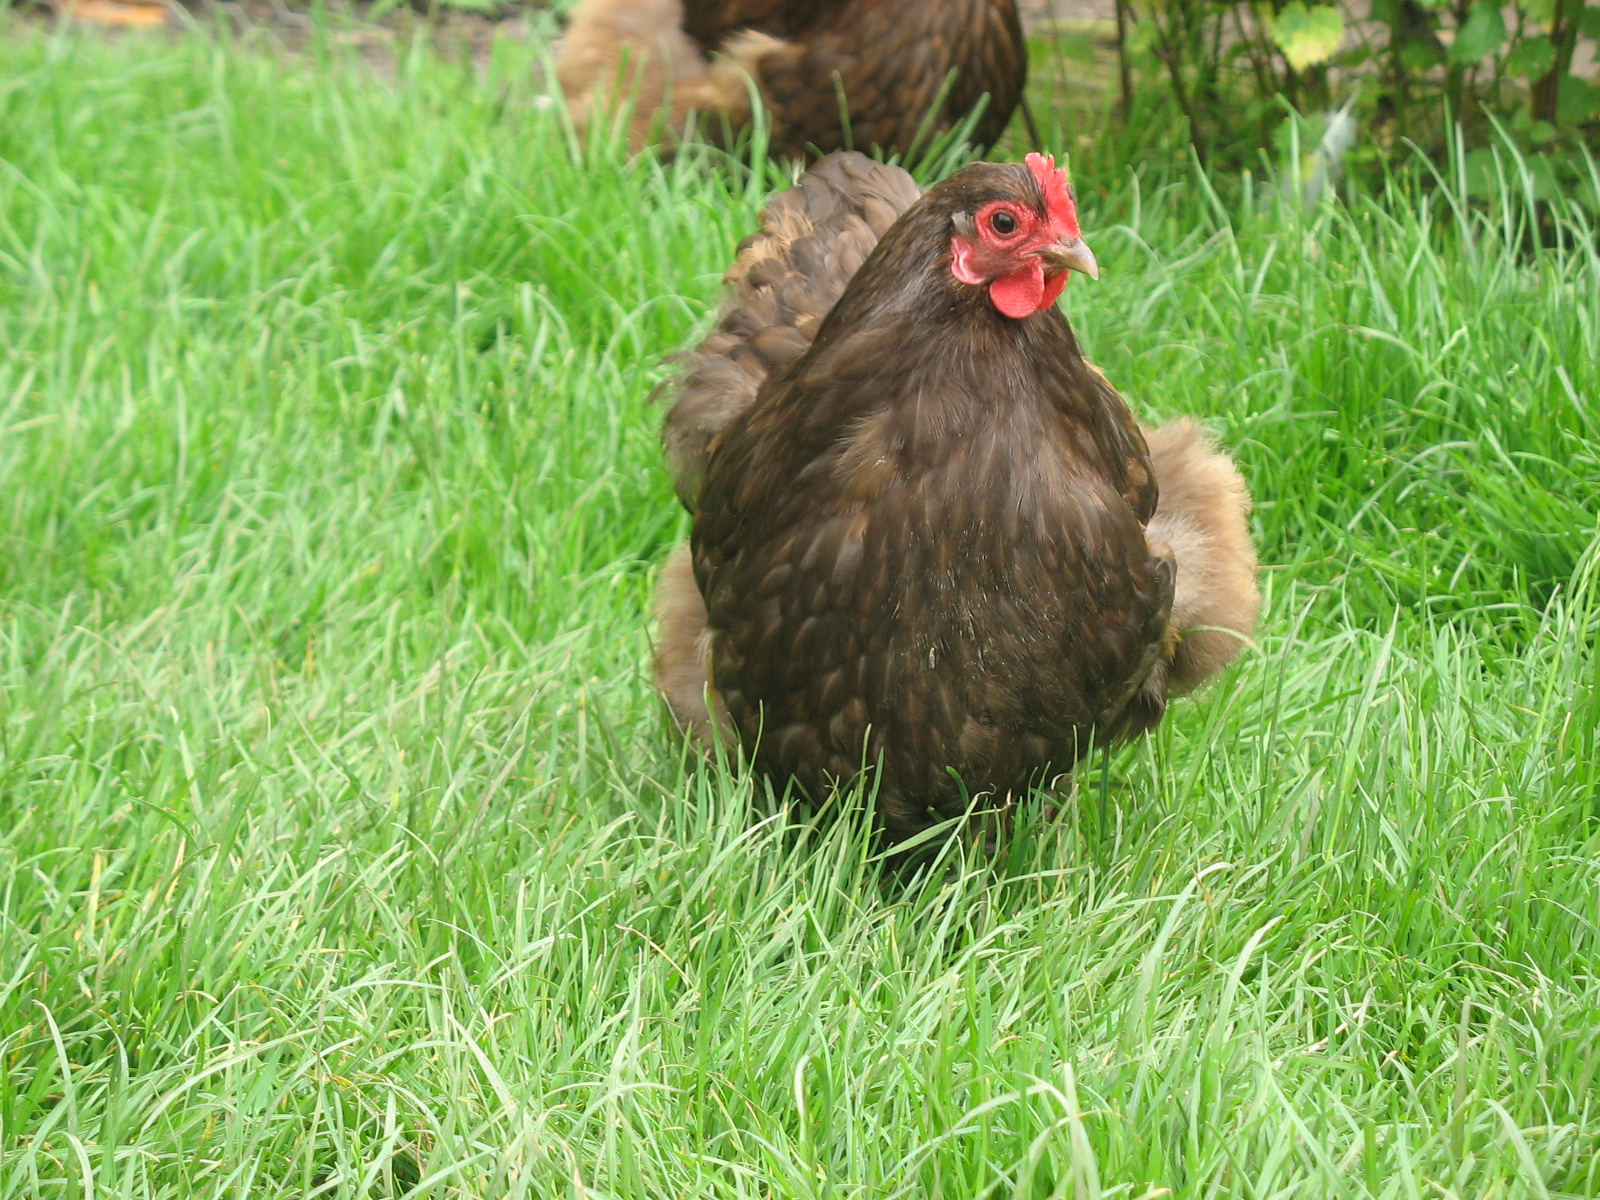 A beautiful little Chocolate Orpington Bantam searching for some tasty treats in the grass